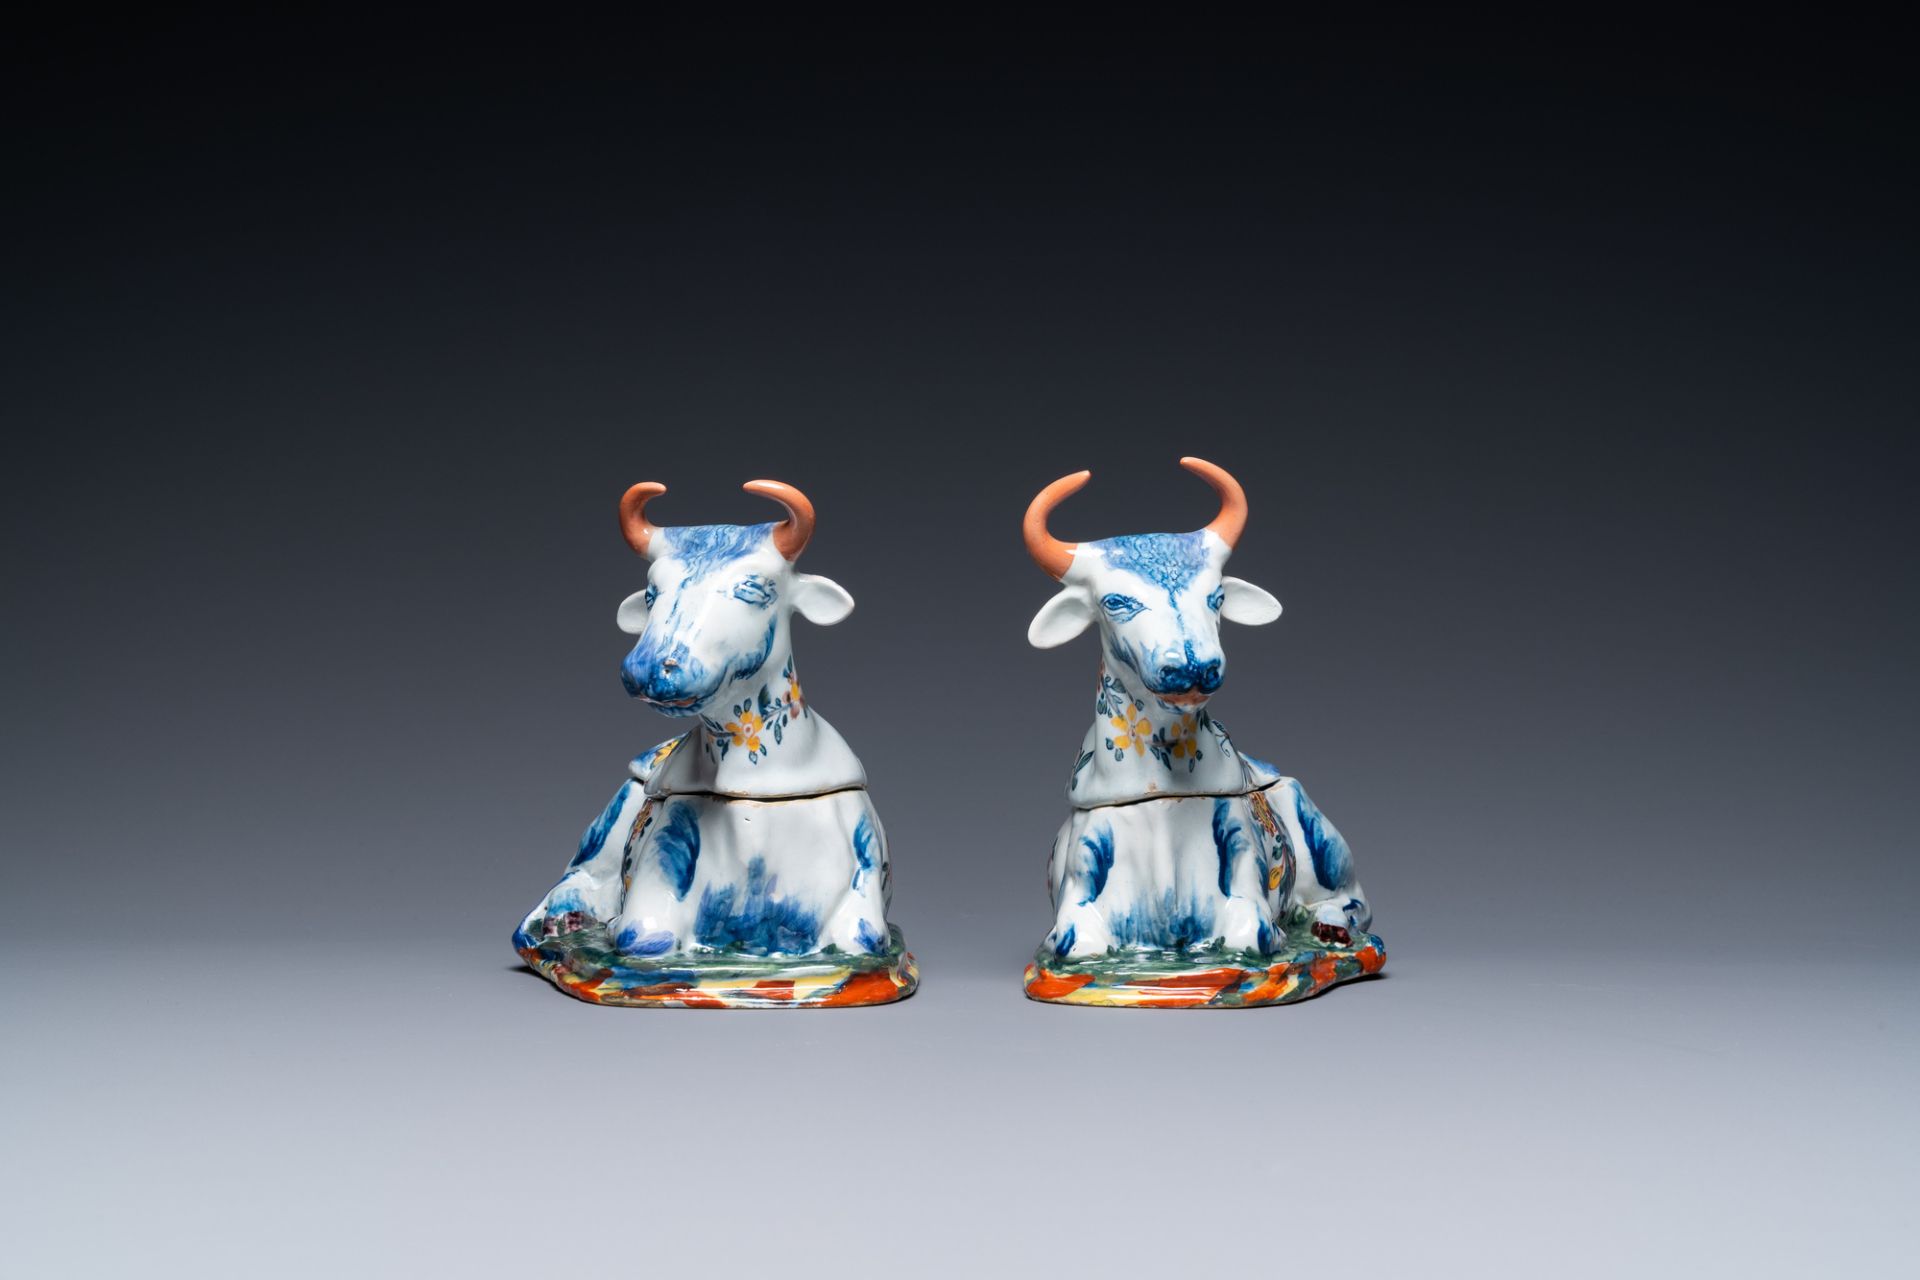 A pair of polychrome Dutch Delft cow-shaped tureens, 18th C. - Image 3 of 7